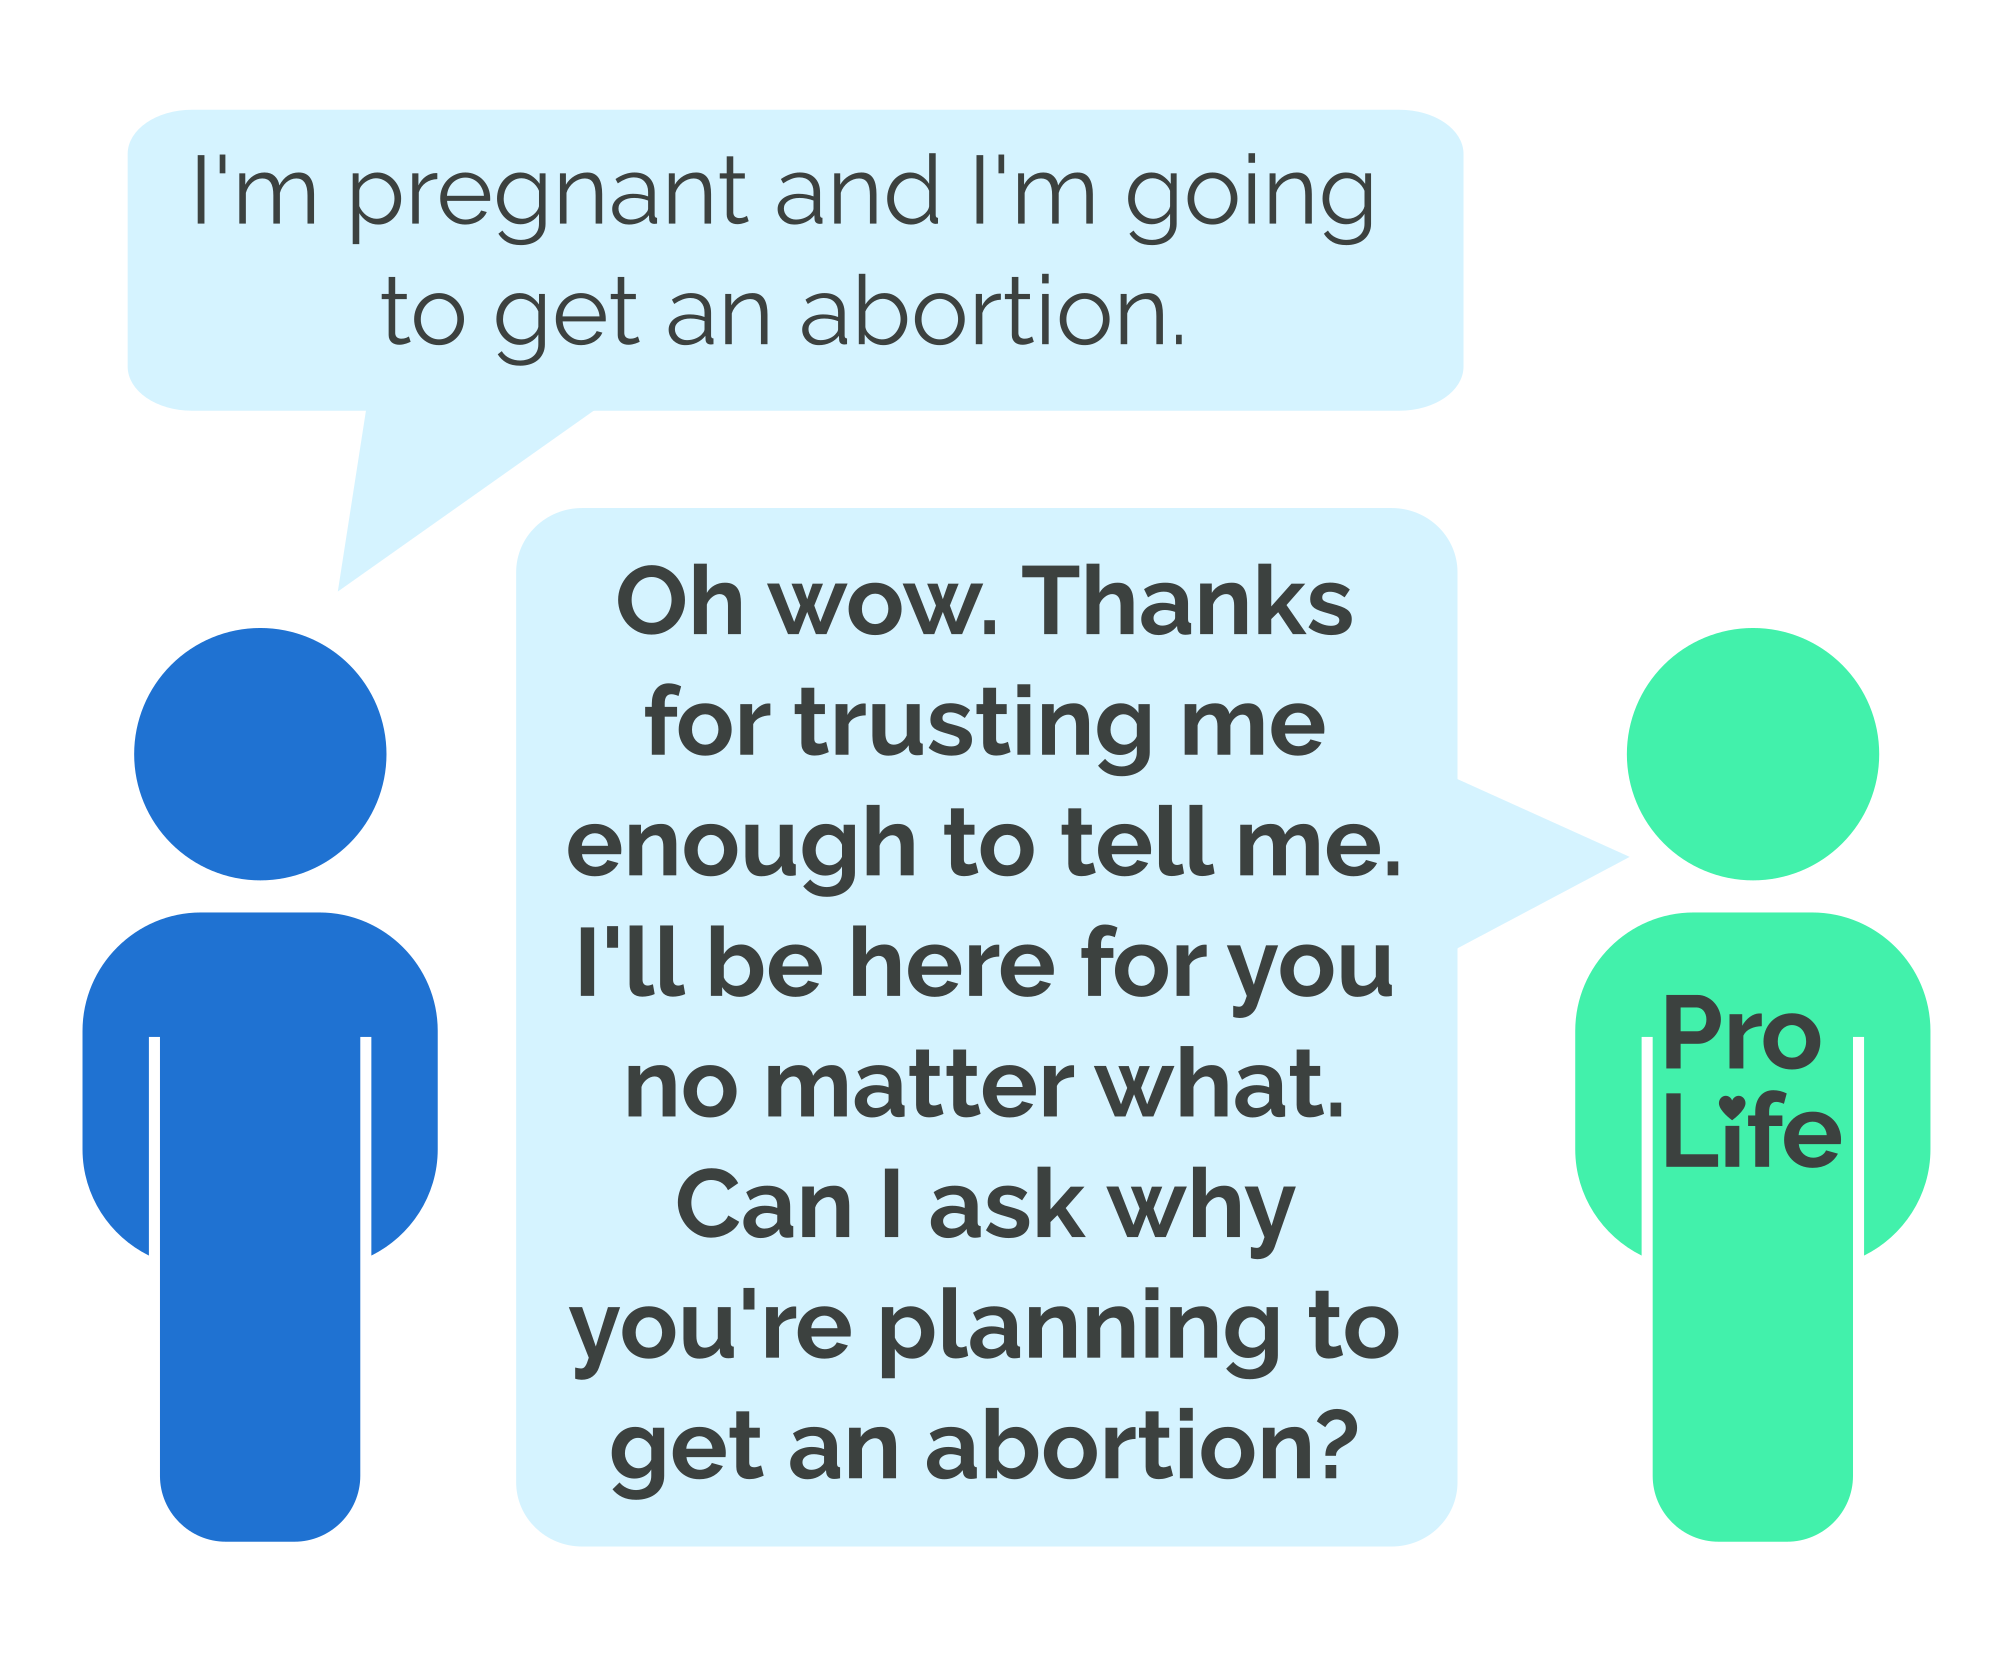 Person 1: I’m pregnant and I’m going to get an abortion. Person 2 (our hero): Oh wow. Thanks for trusting me enough to tell me. I’ll be here for you no matter what. Can I ask why you’re planning to get an abortion?